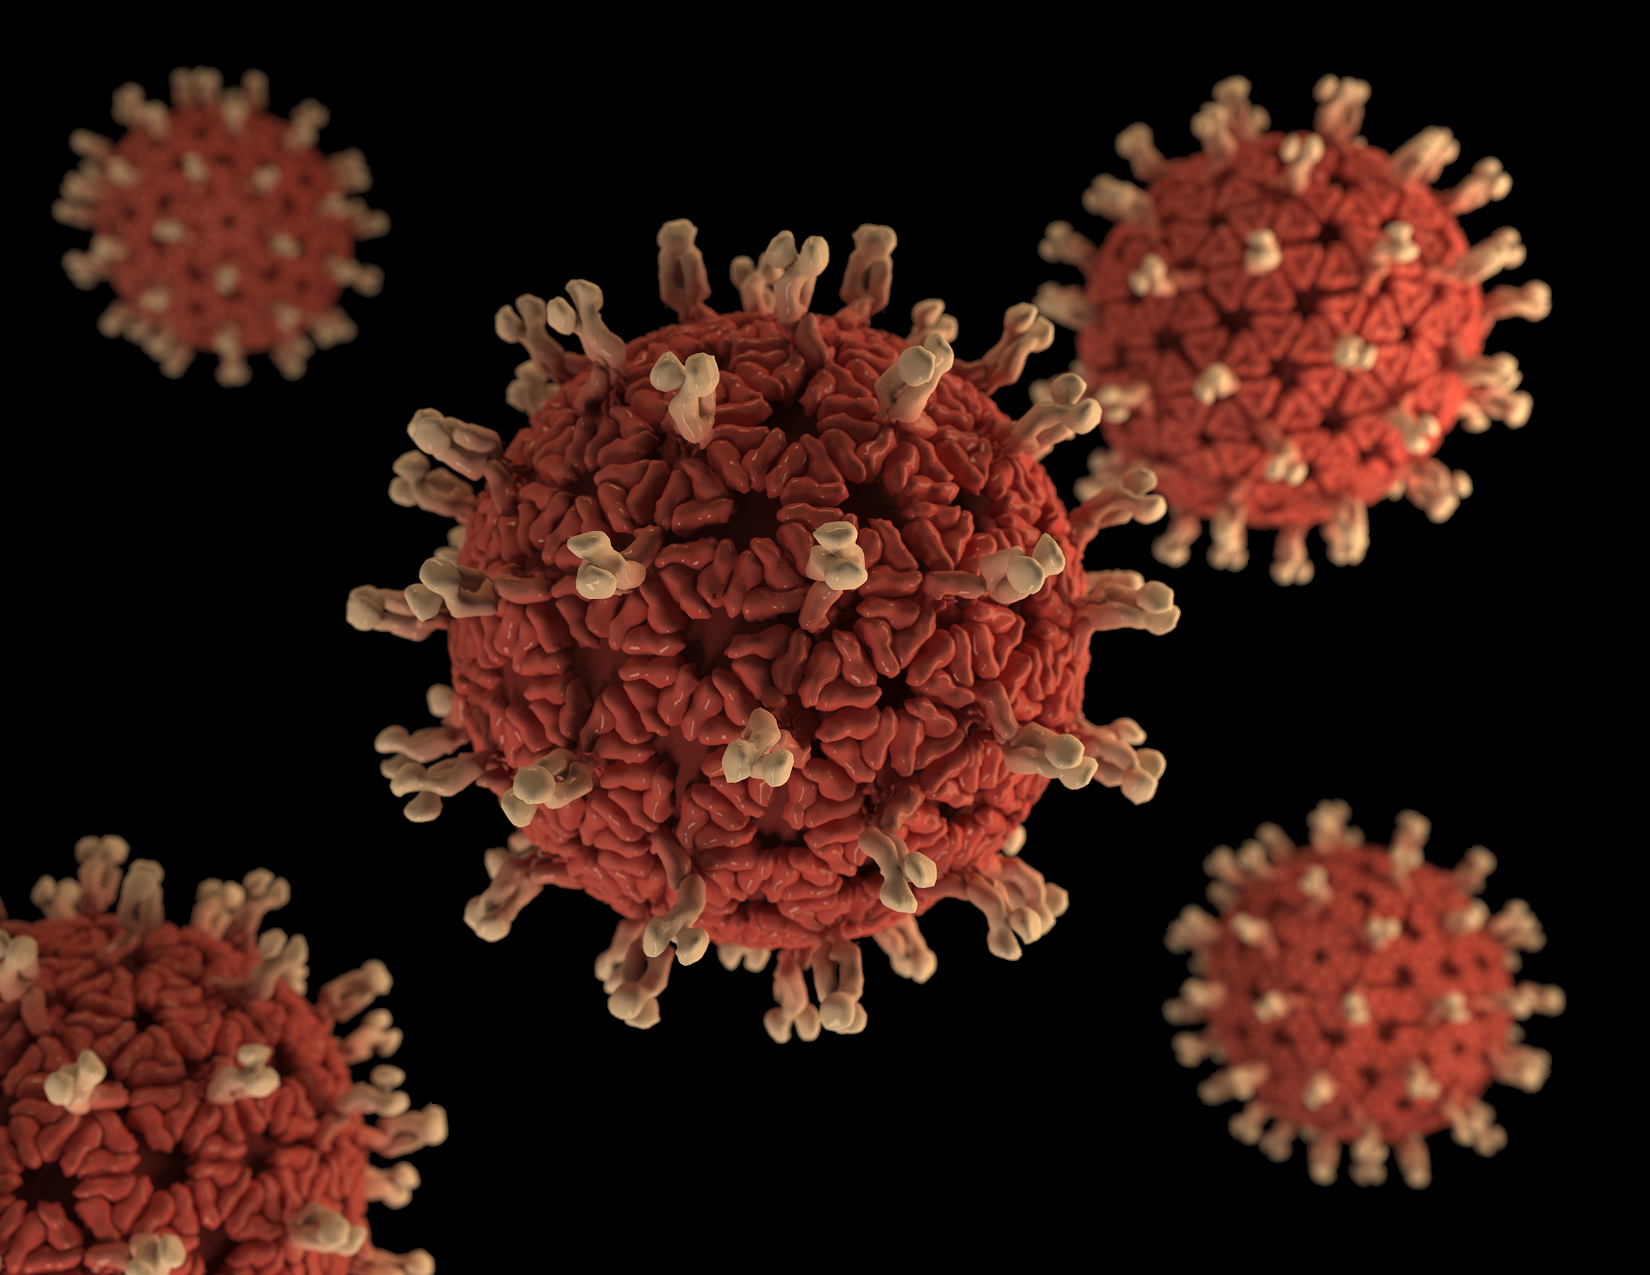 3D graphical representation of a number of rotavirus virions. The organism’s characteristic wheel-like appearance under the electron microscope gives the rotavirus its name from the Latin 'rota', meaning 'wheel.' Rotaviruses are nonenveloped, double-shelled viruses, making them quite stable in the environment.